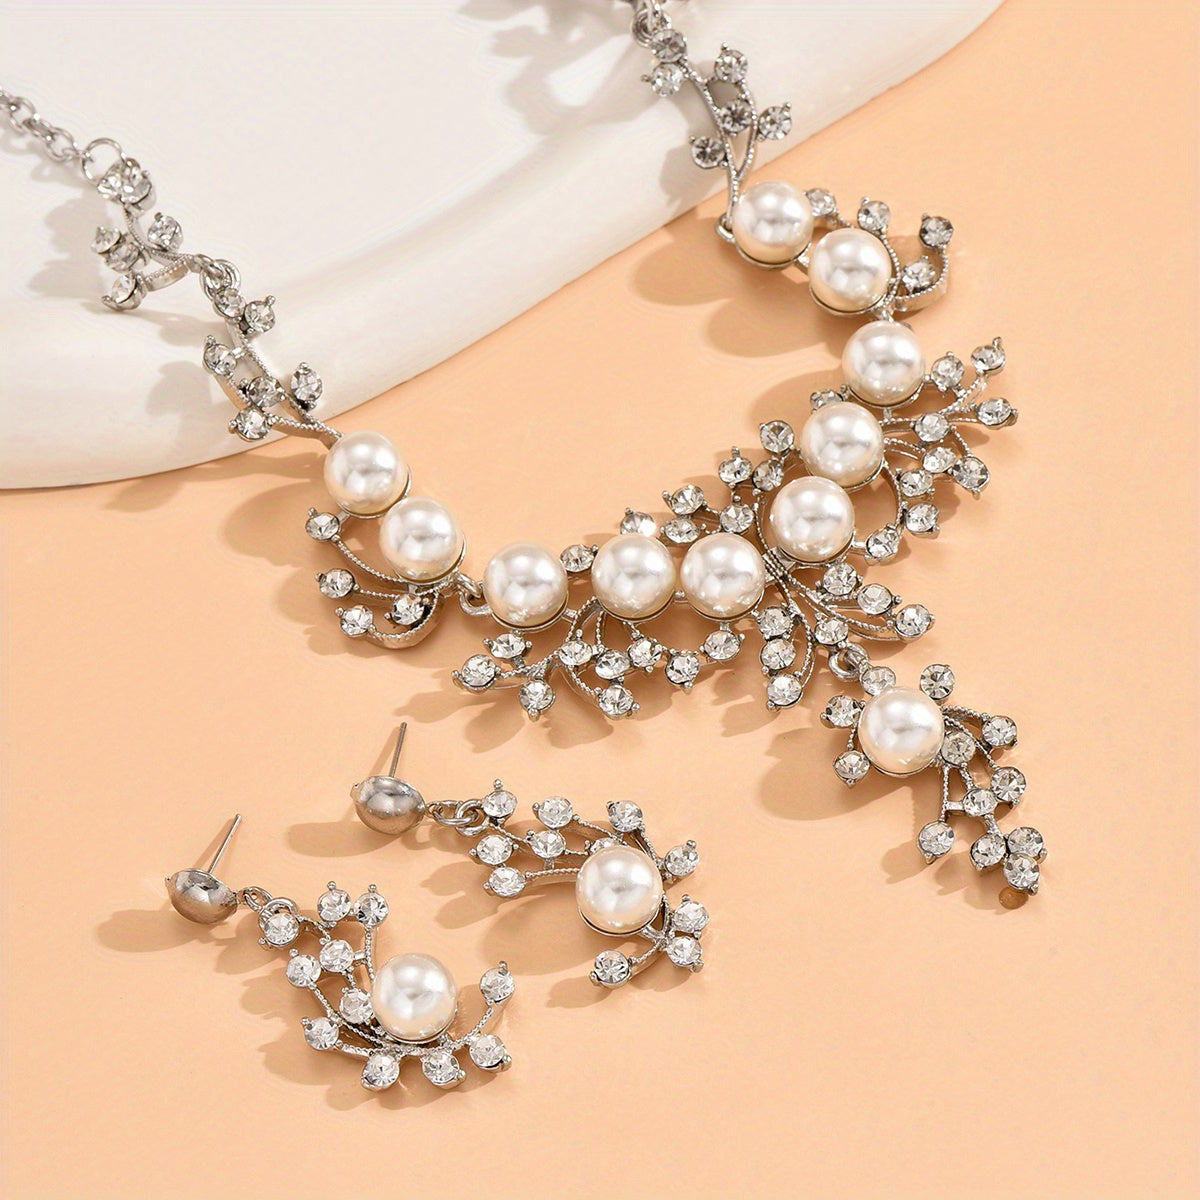 Elegant Faux Pearl Bridal Jewelry Set - Necklace and Earrings for Weddings and Special Occasions